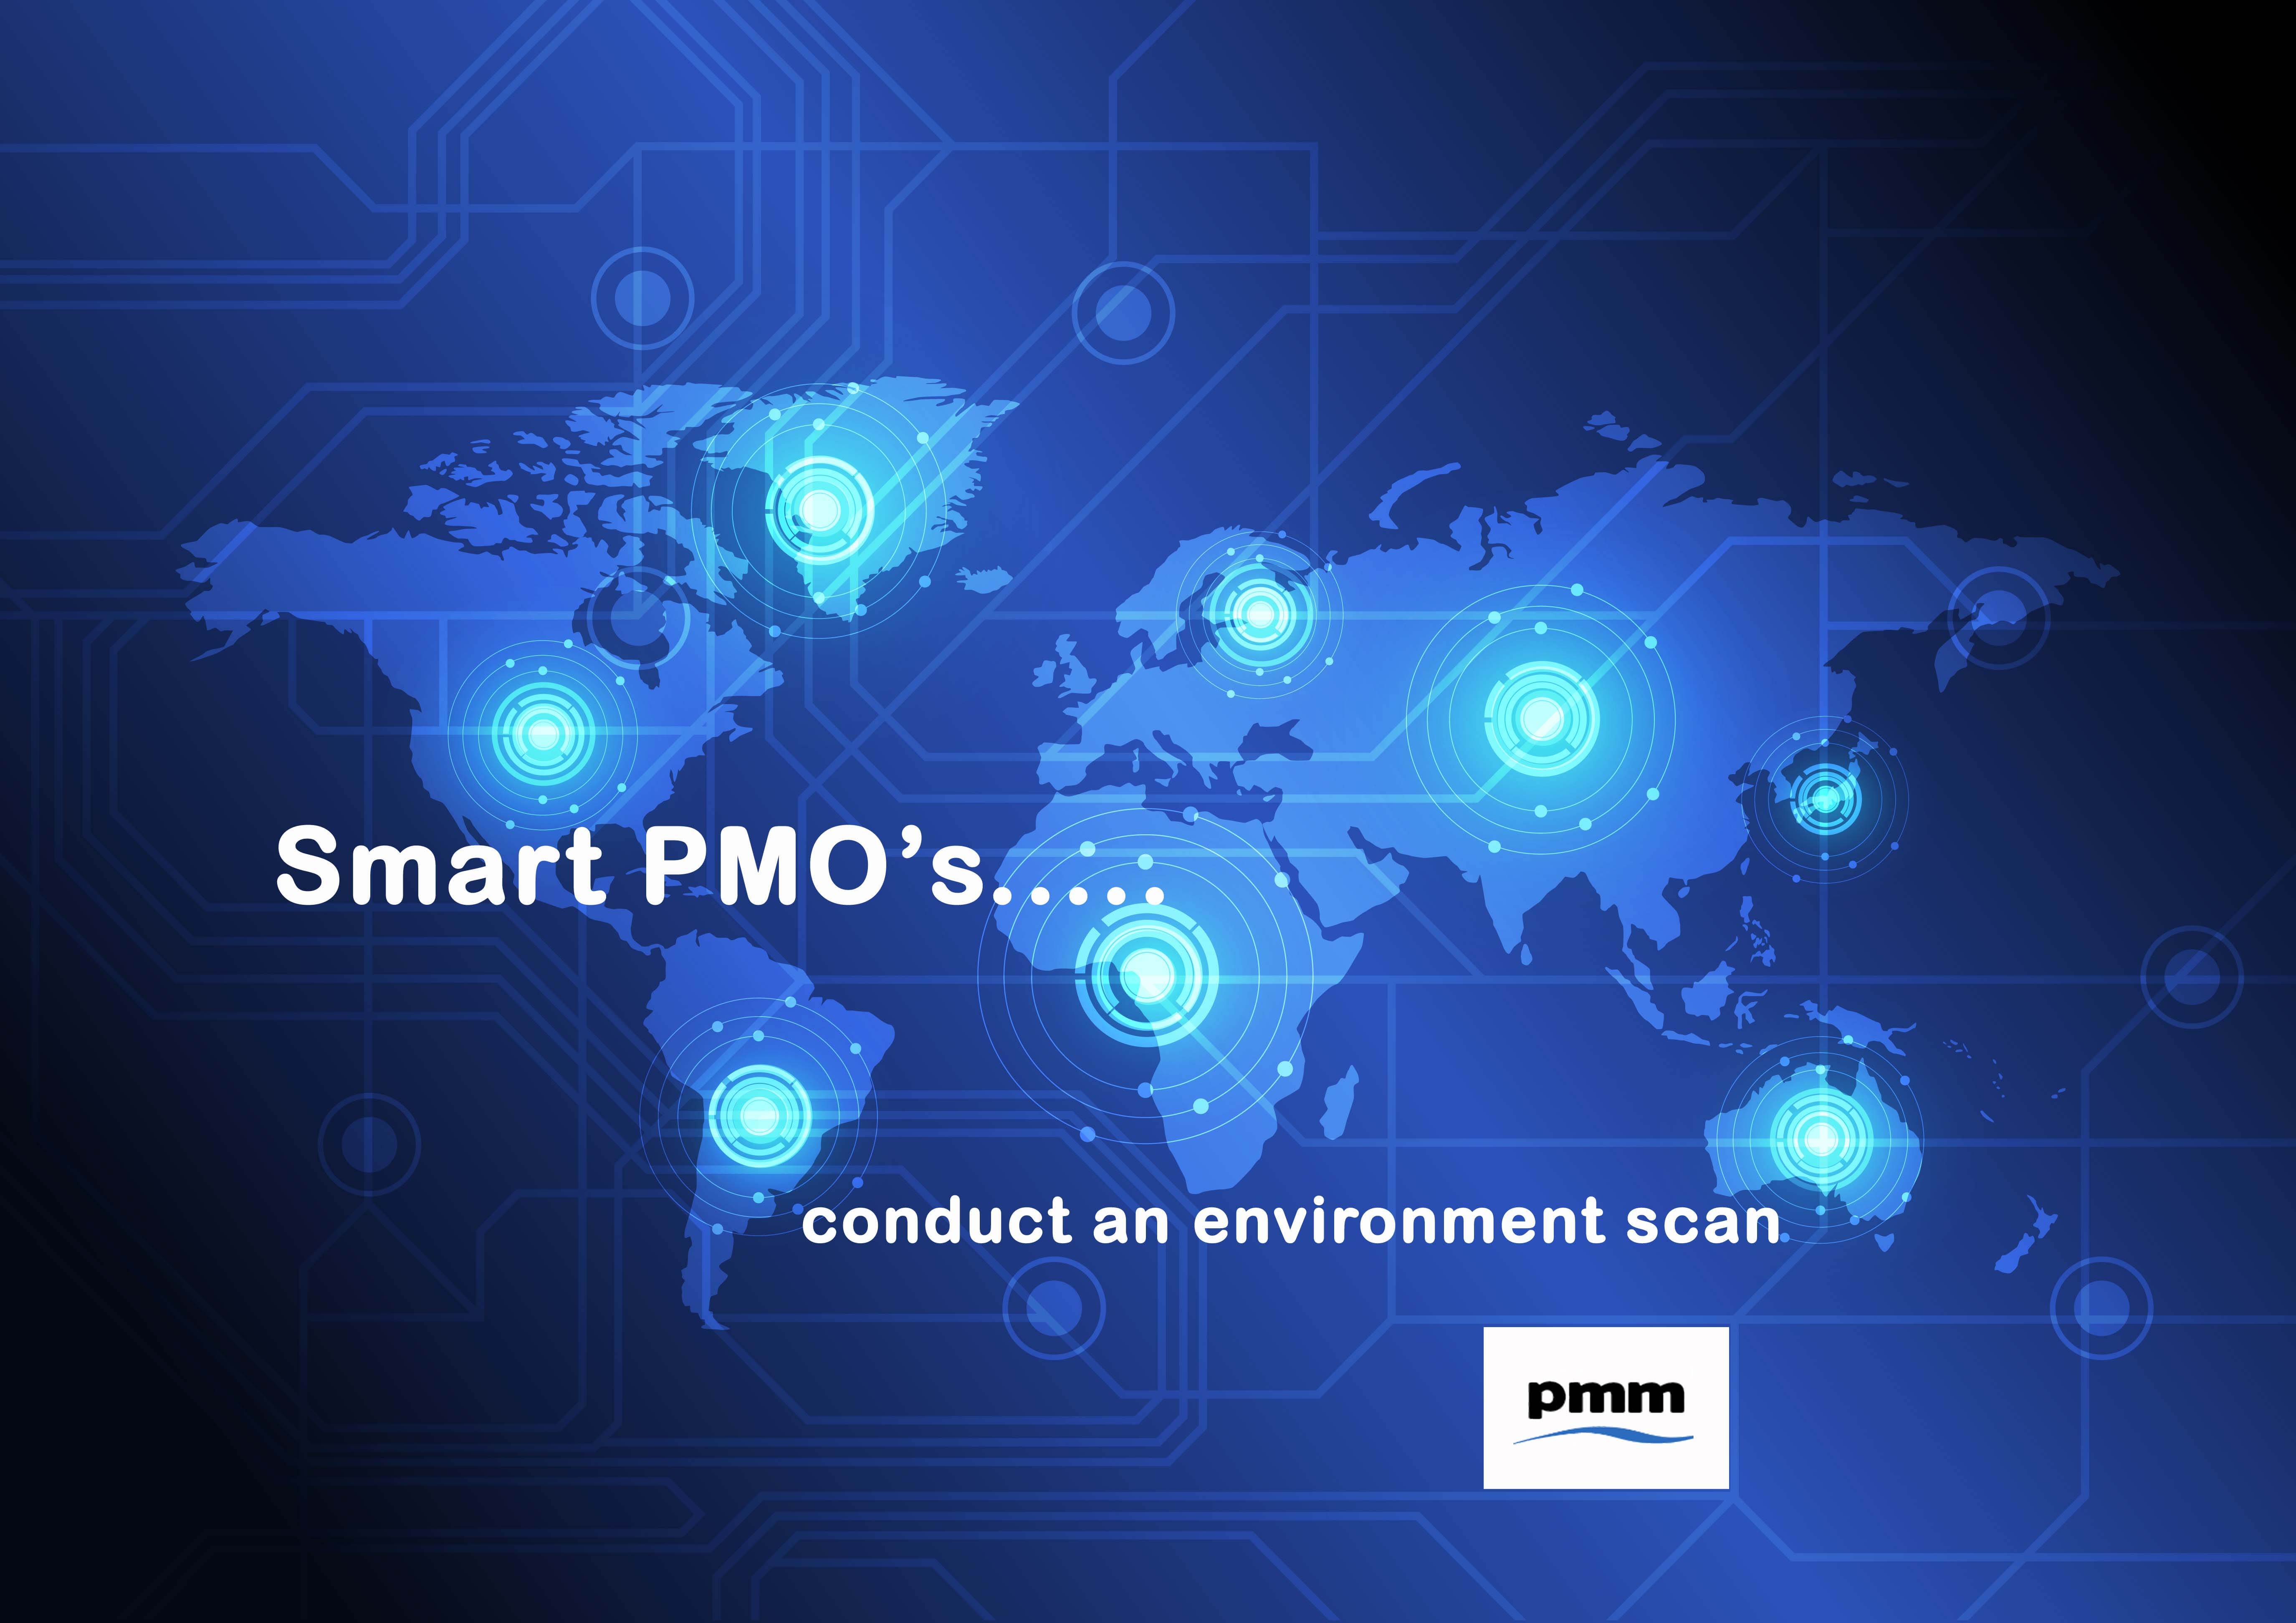 PMO conducting an environment scan for tools and processes